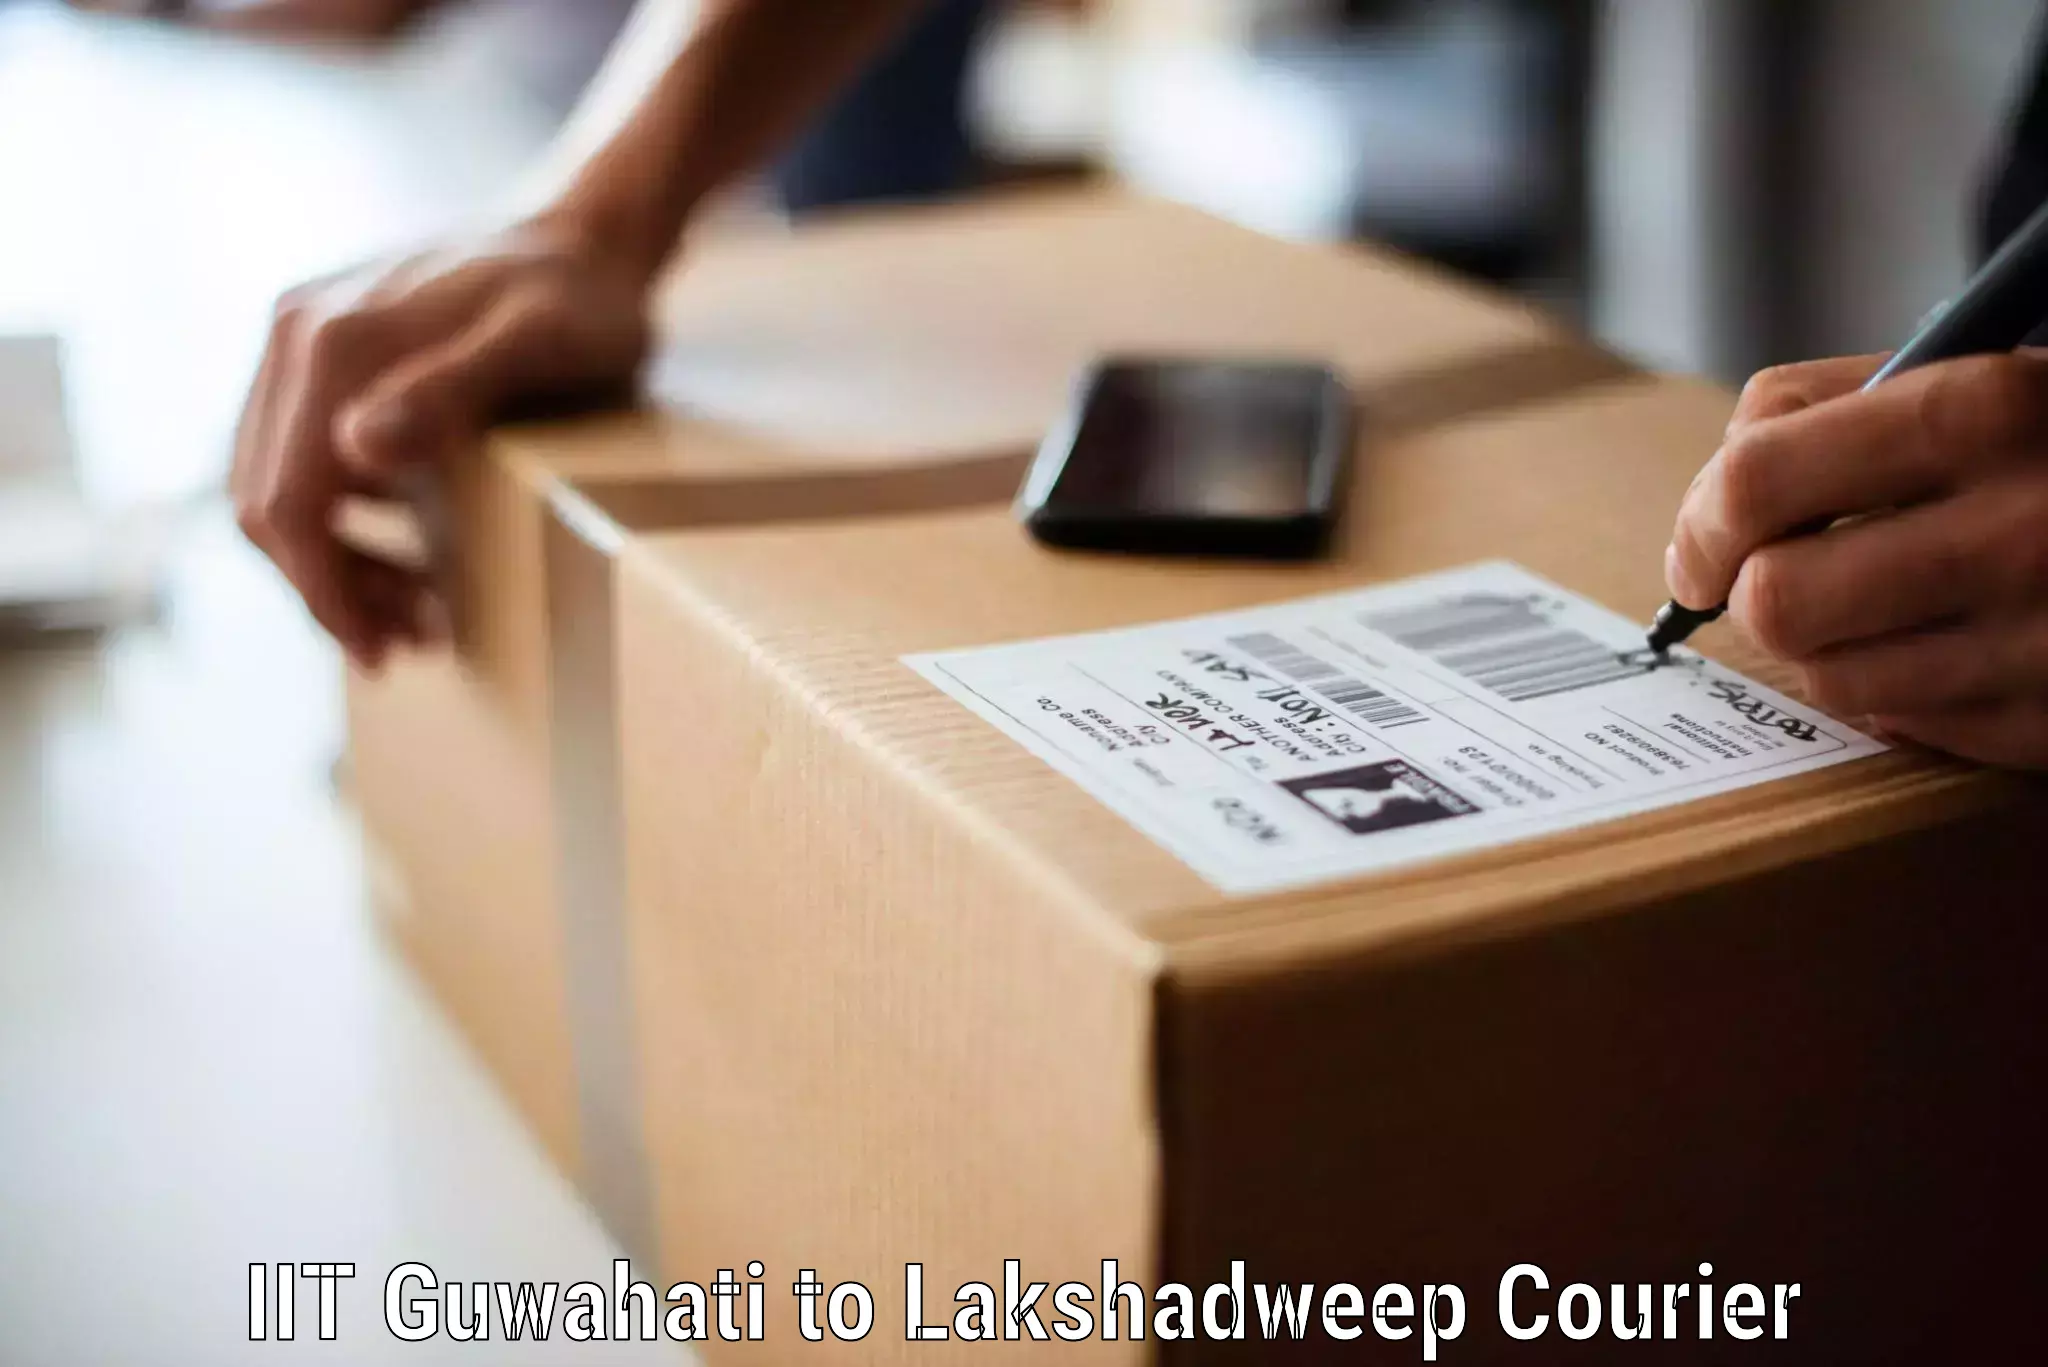 Professional movers and packers IIT Guwahati to Lakshadweep